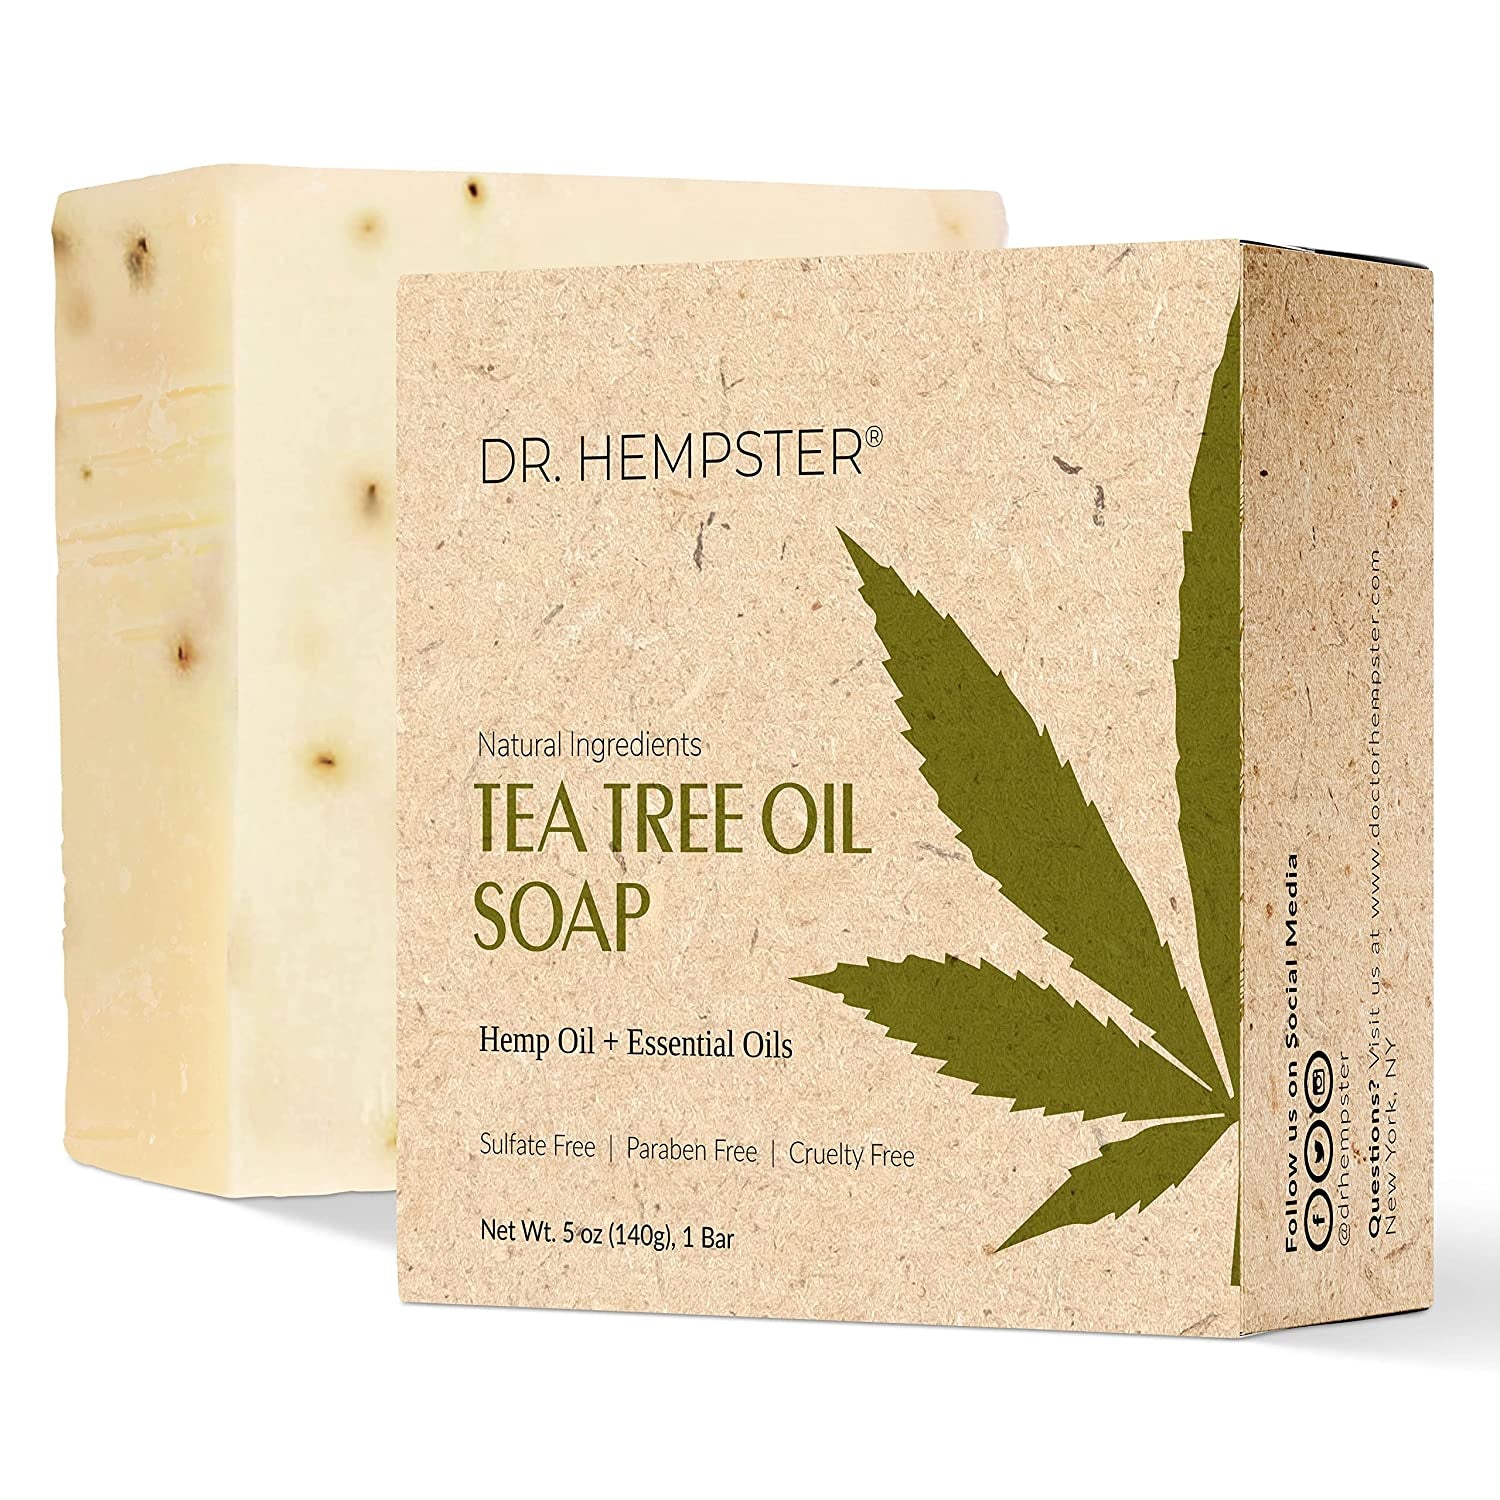 Hemp & Tea-Tree Soap Bar, 5oz Bar Soap - Skin Cleansing Hemp Soap - Moisturizing, Soothing, Antioxidant Formula with Natural and Organic Ingredients - Made in the USA